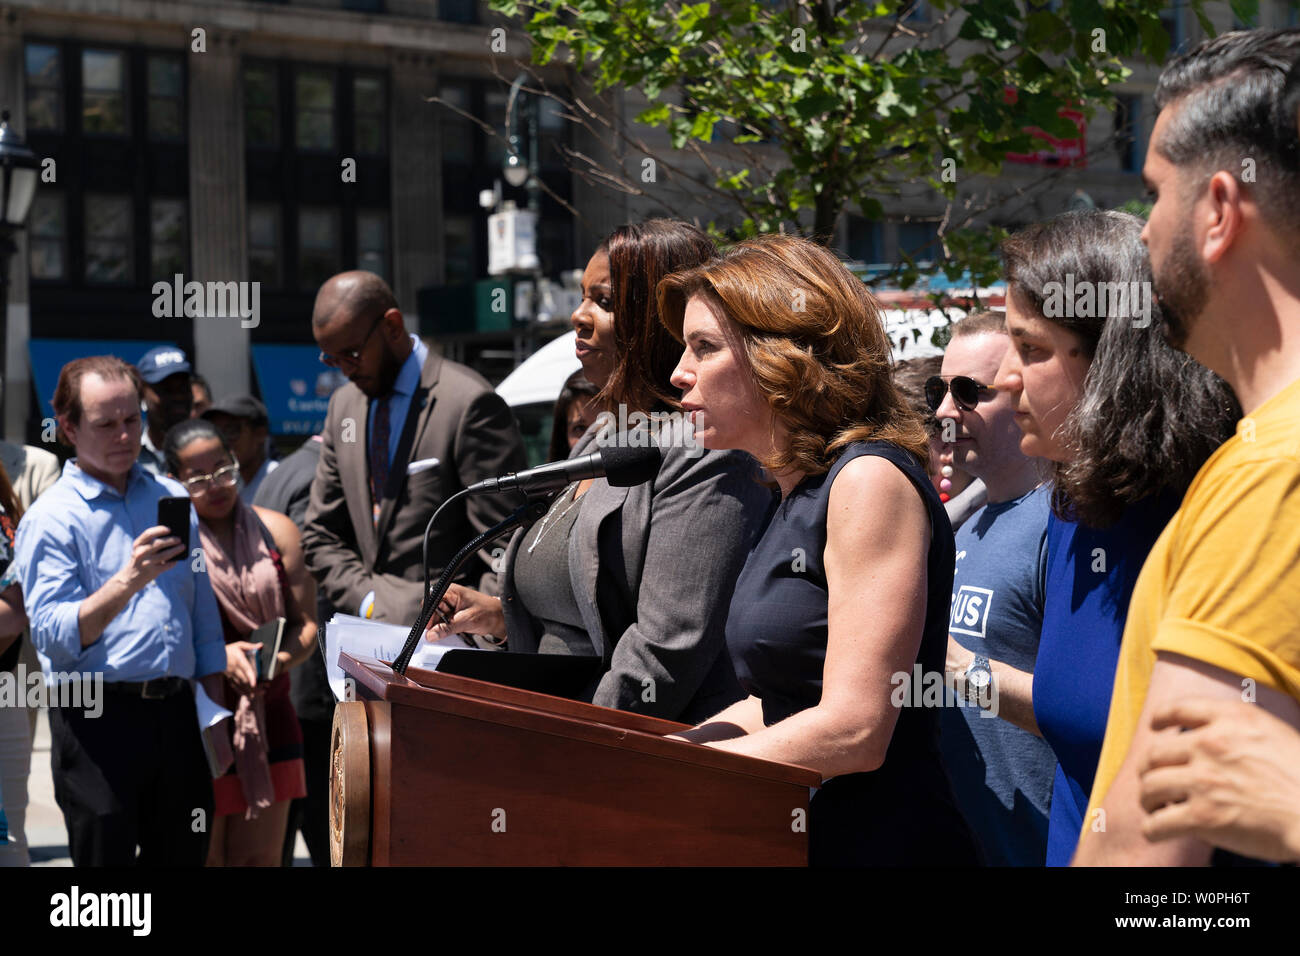 New York, United States. 27th June, 2019. NYC Census Director Julie Menin speaks at press conference to react on Supreme Court ruling on the U.S. Census citizenship question at Foley Square Credit: Lev Radin/Pacific Press/Alamy Live News Stock Photo